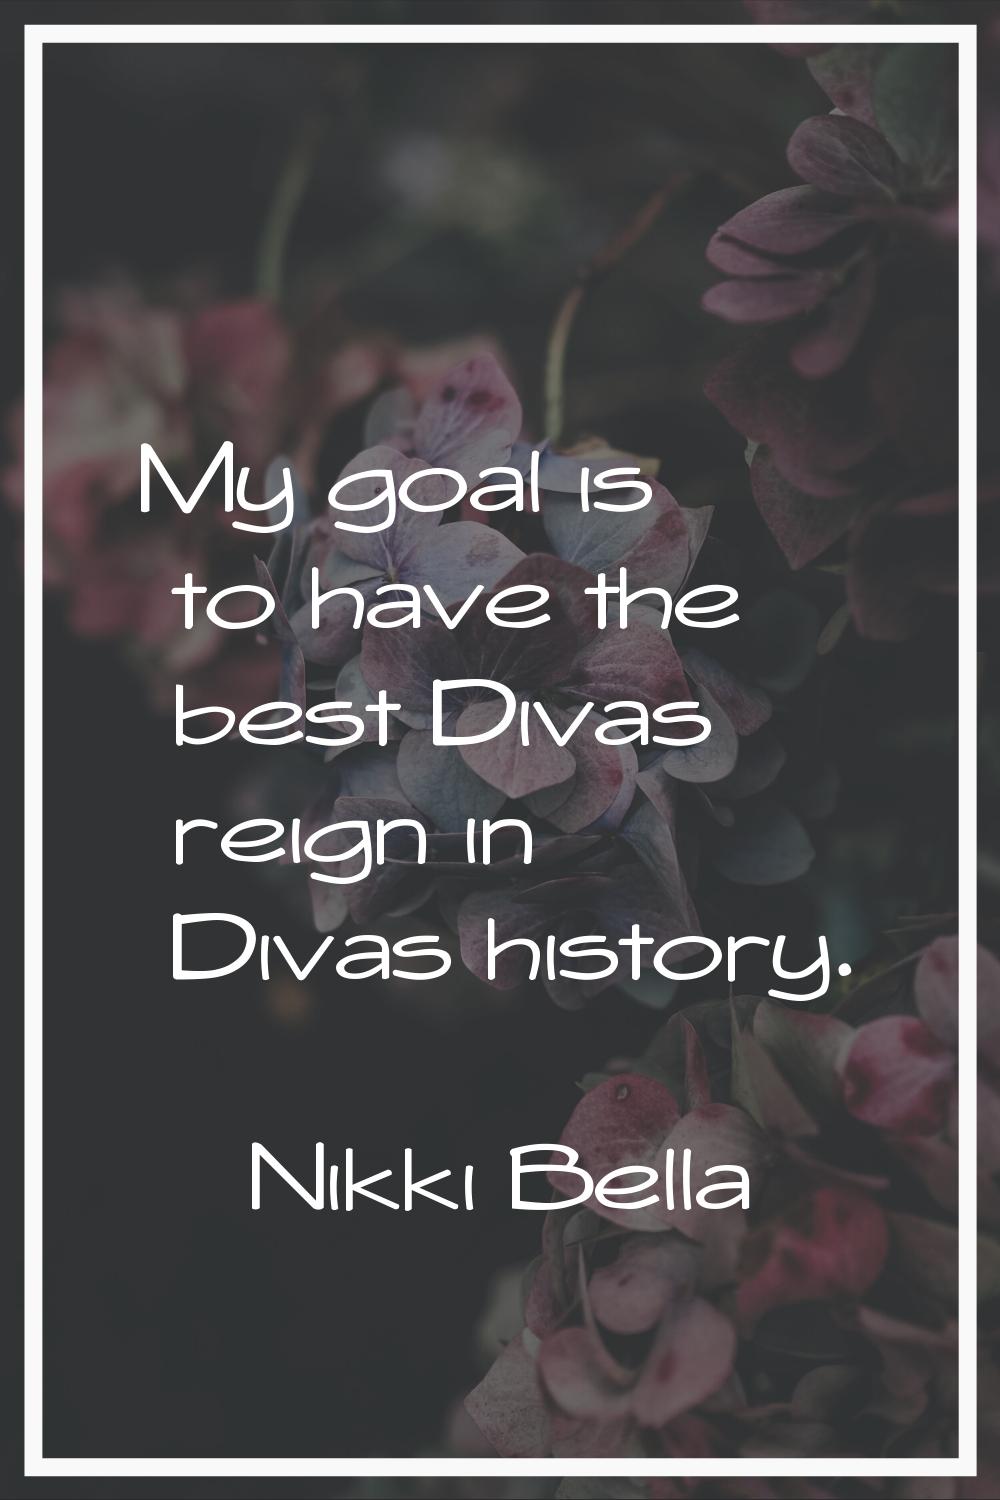 My goal is to have the best Divas reign in Divas history.